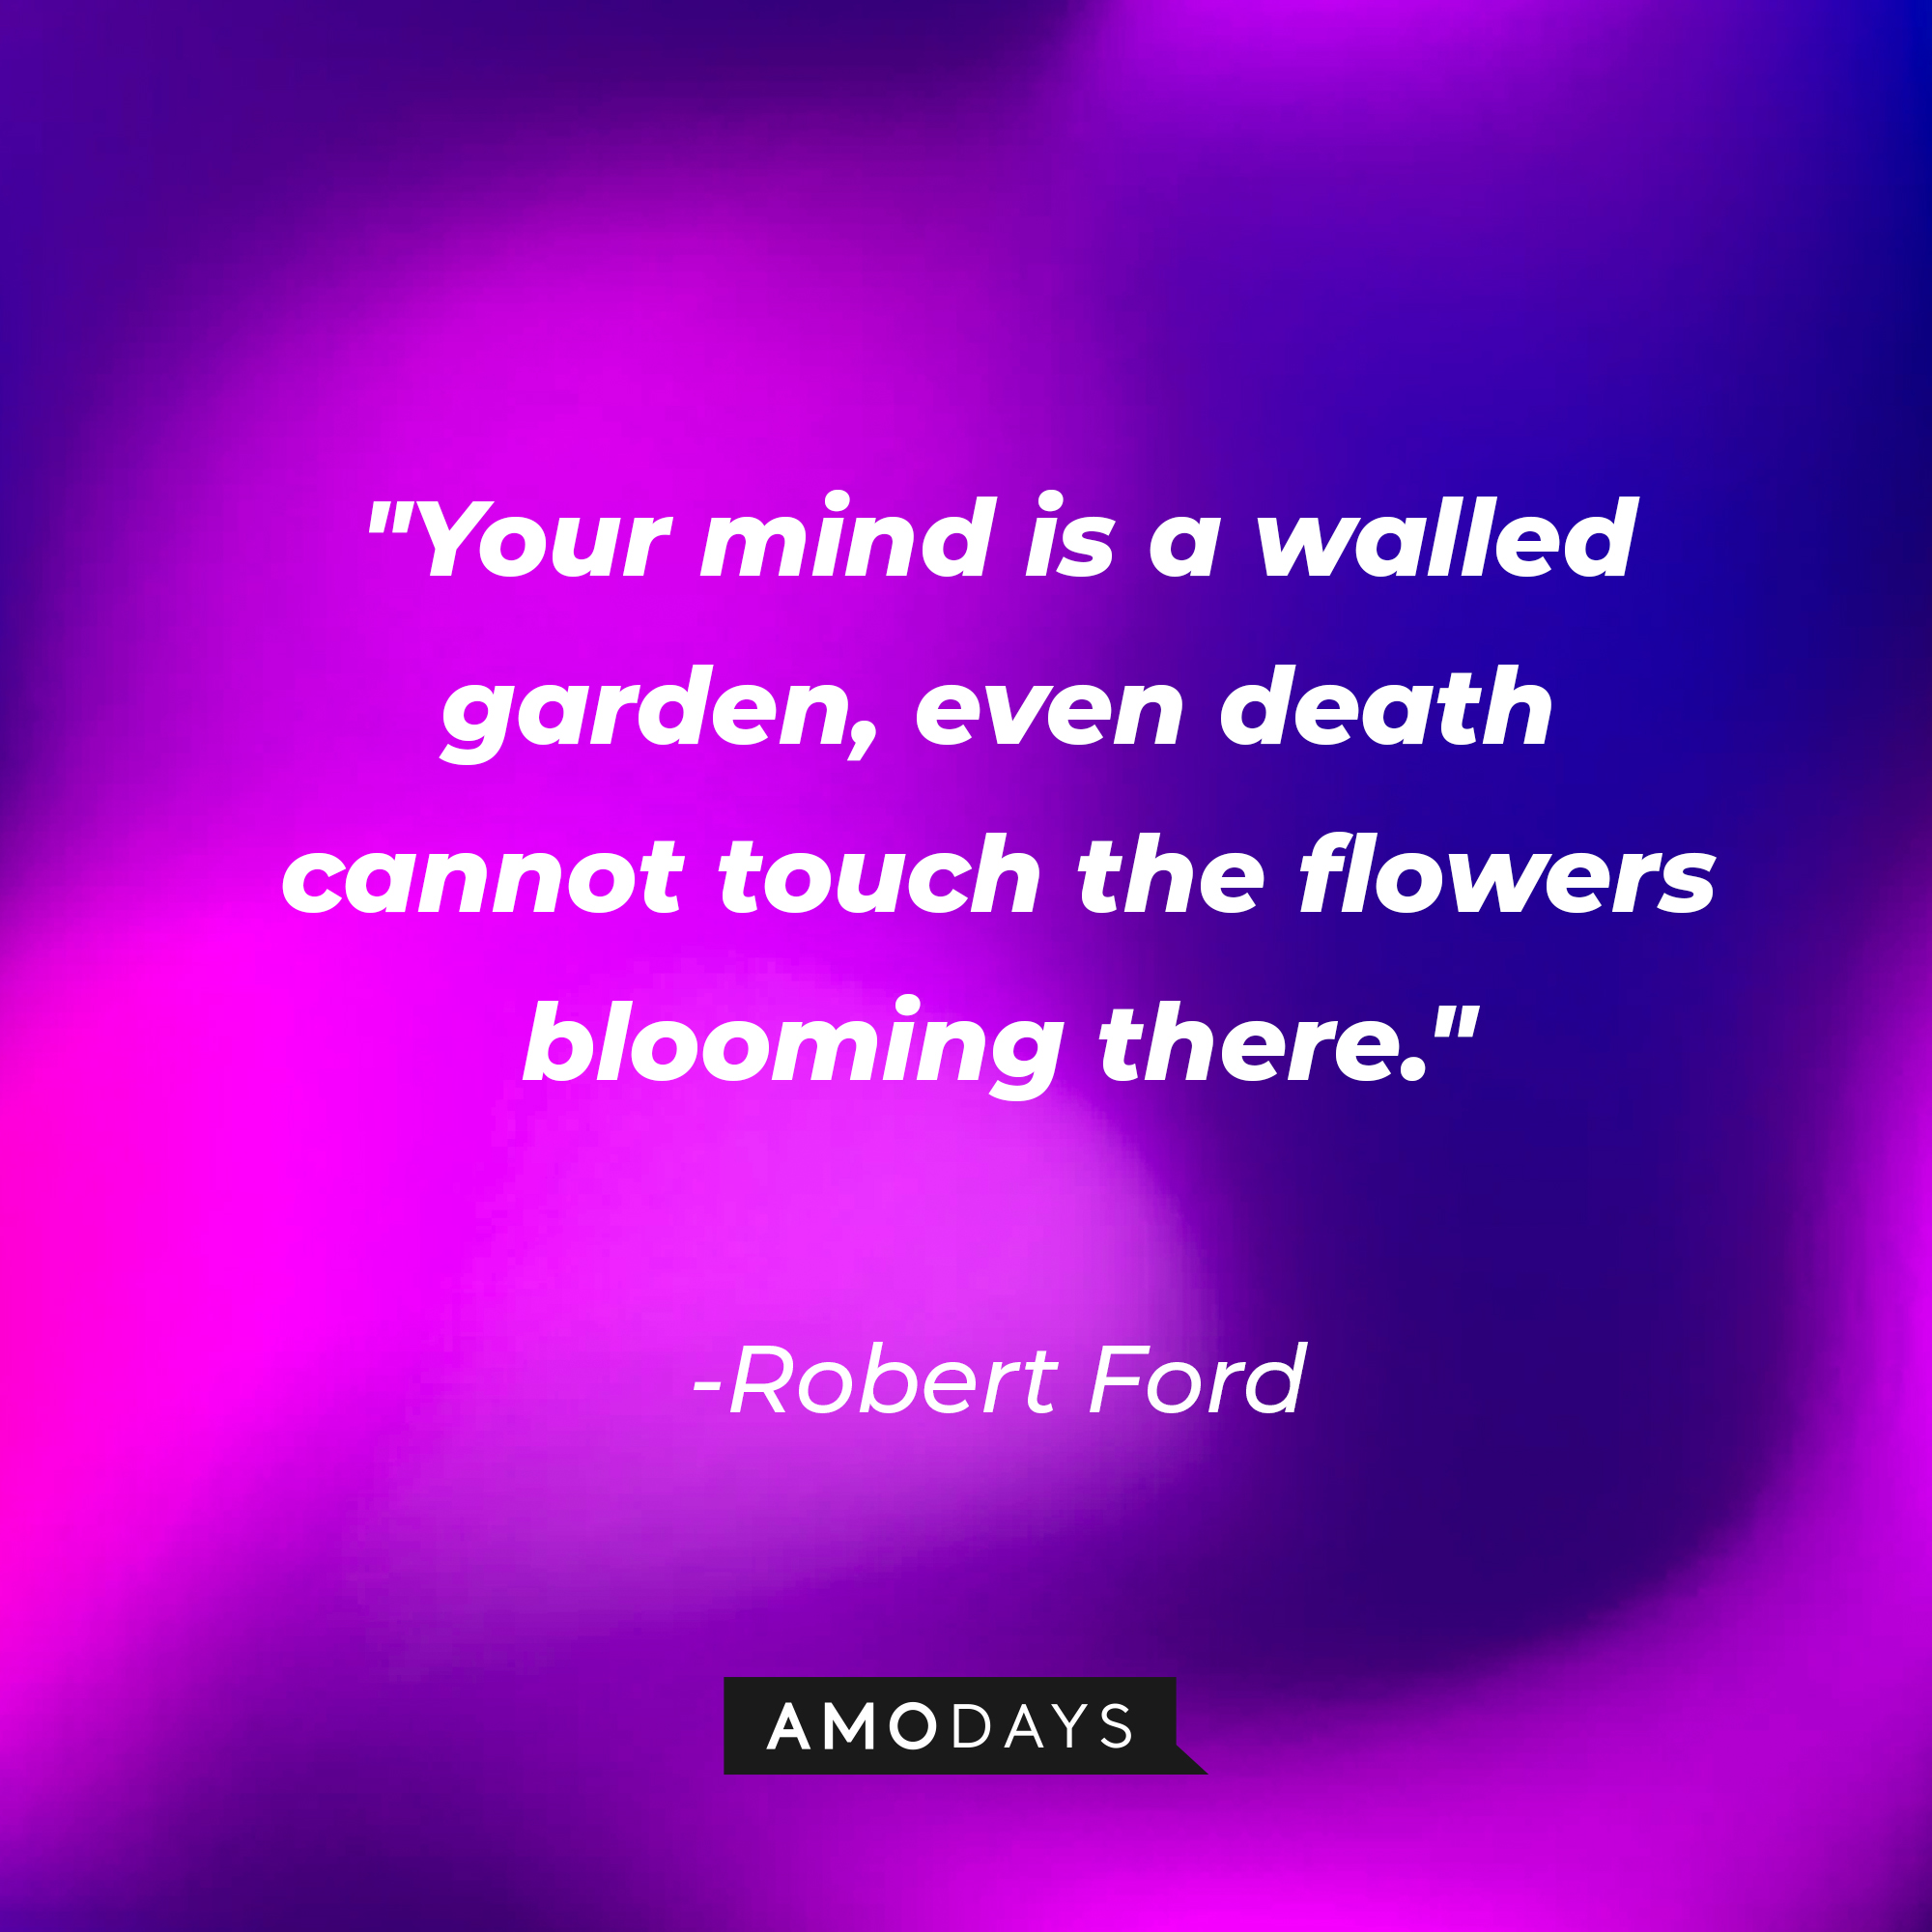 Robert Ford's quote: "Your mind is a walled garden, even death cannot touch the flowers blooming there." | Source: AmoDays